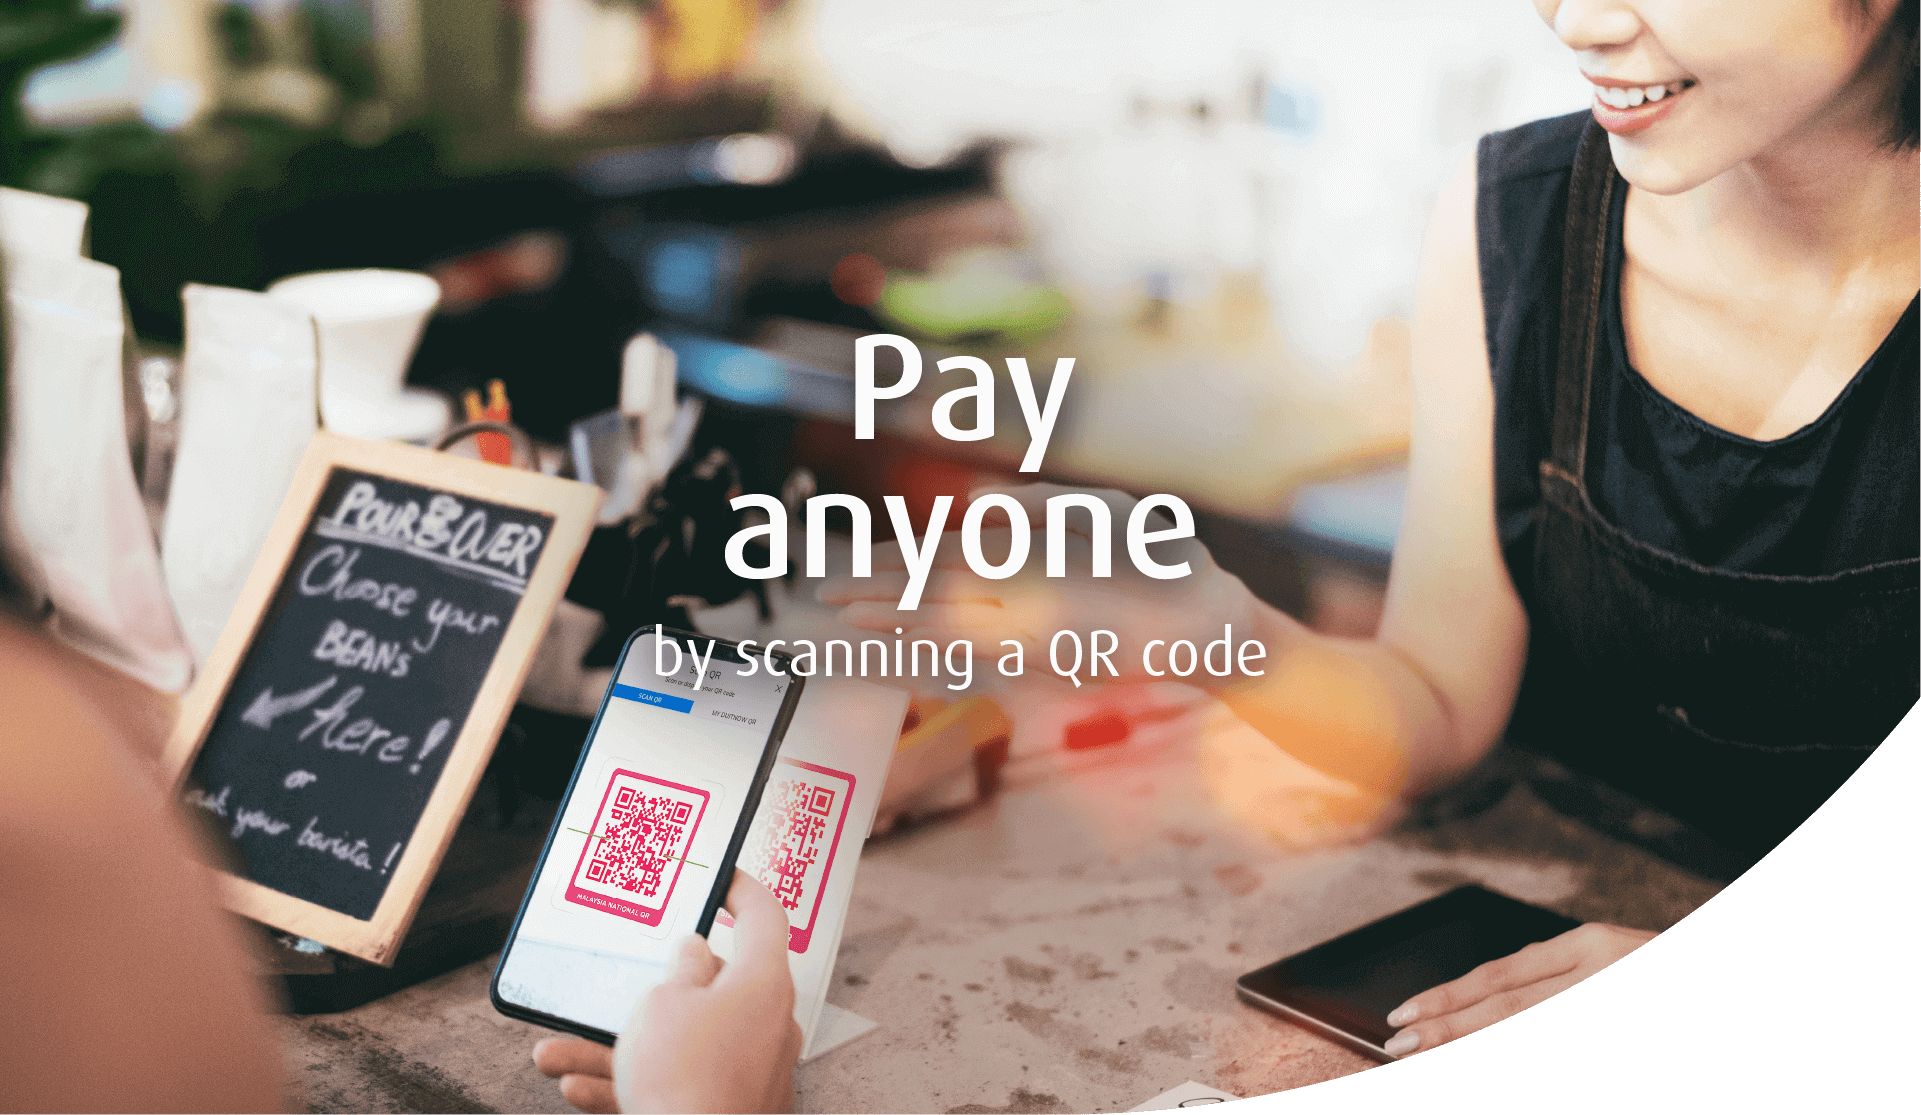 Pay anyone by scanning a QR code